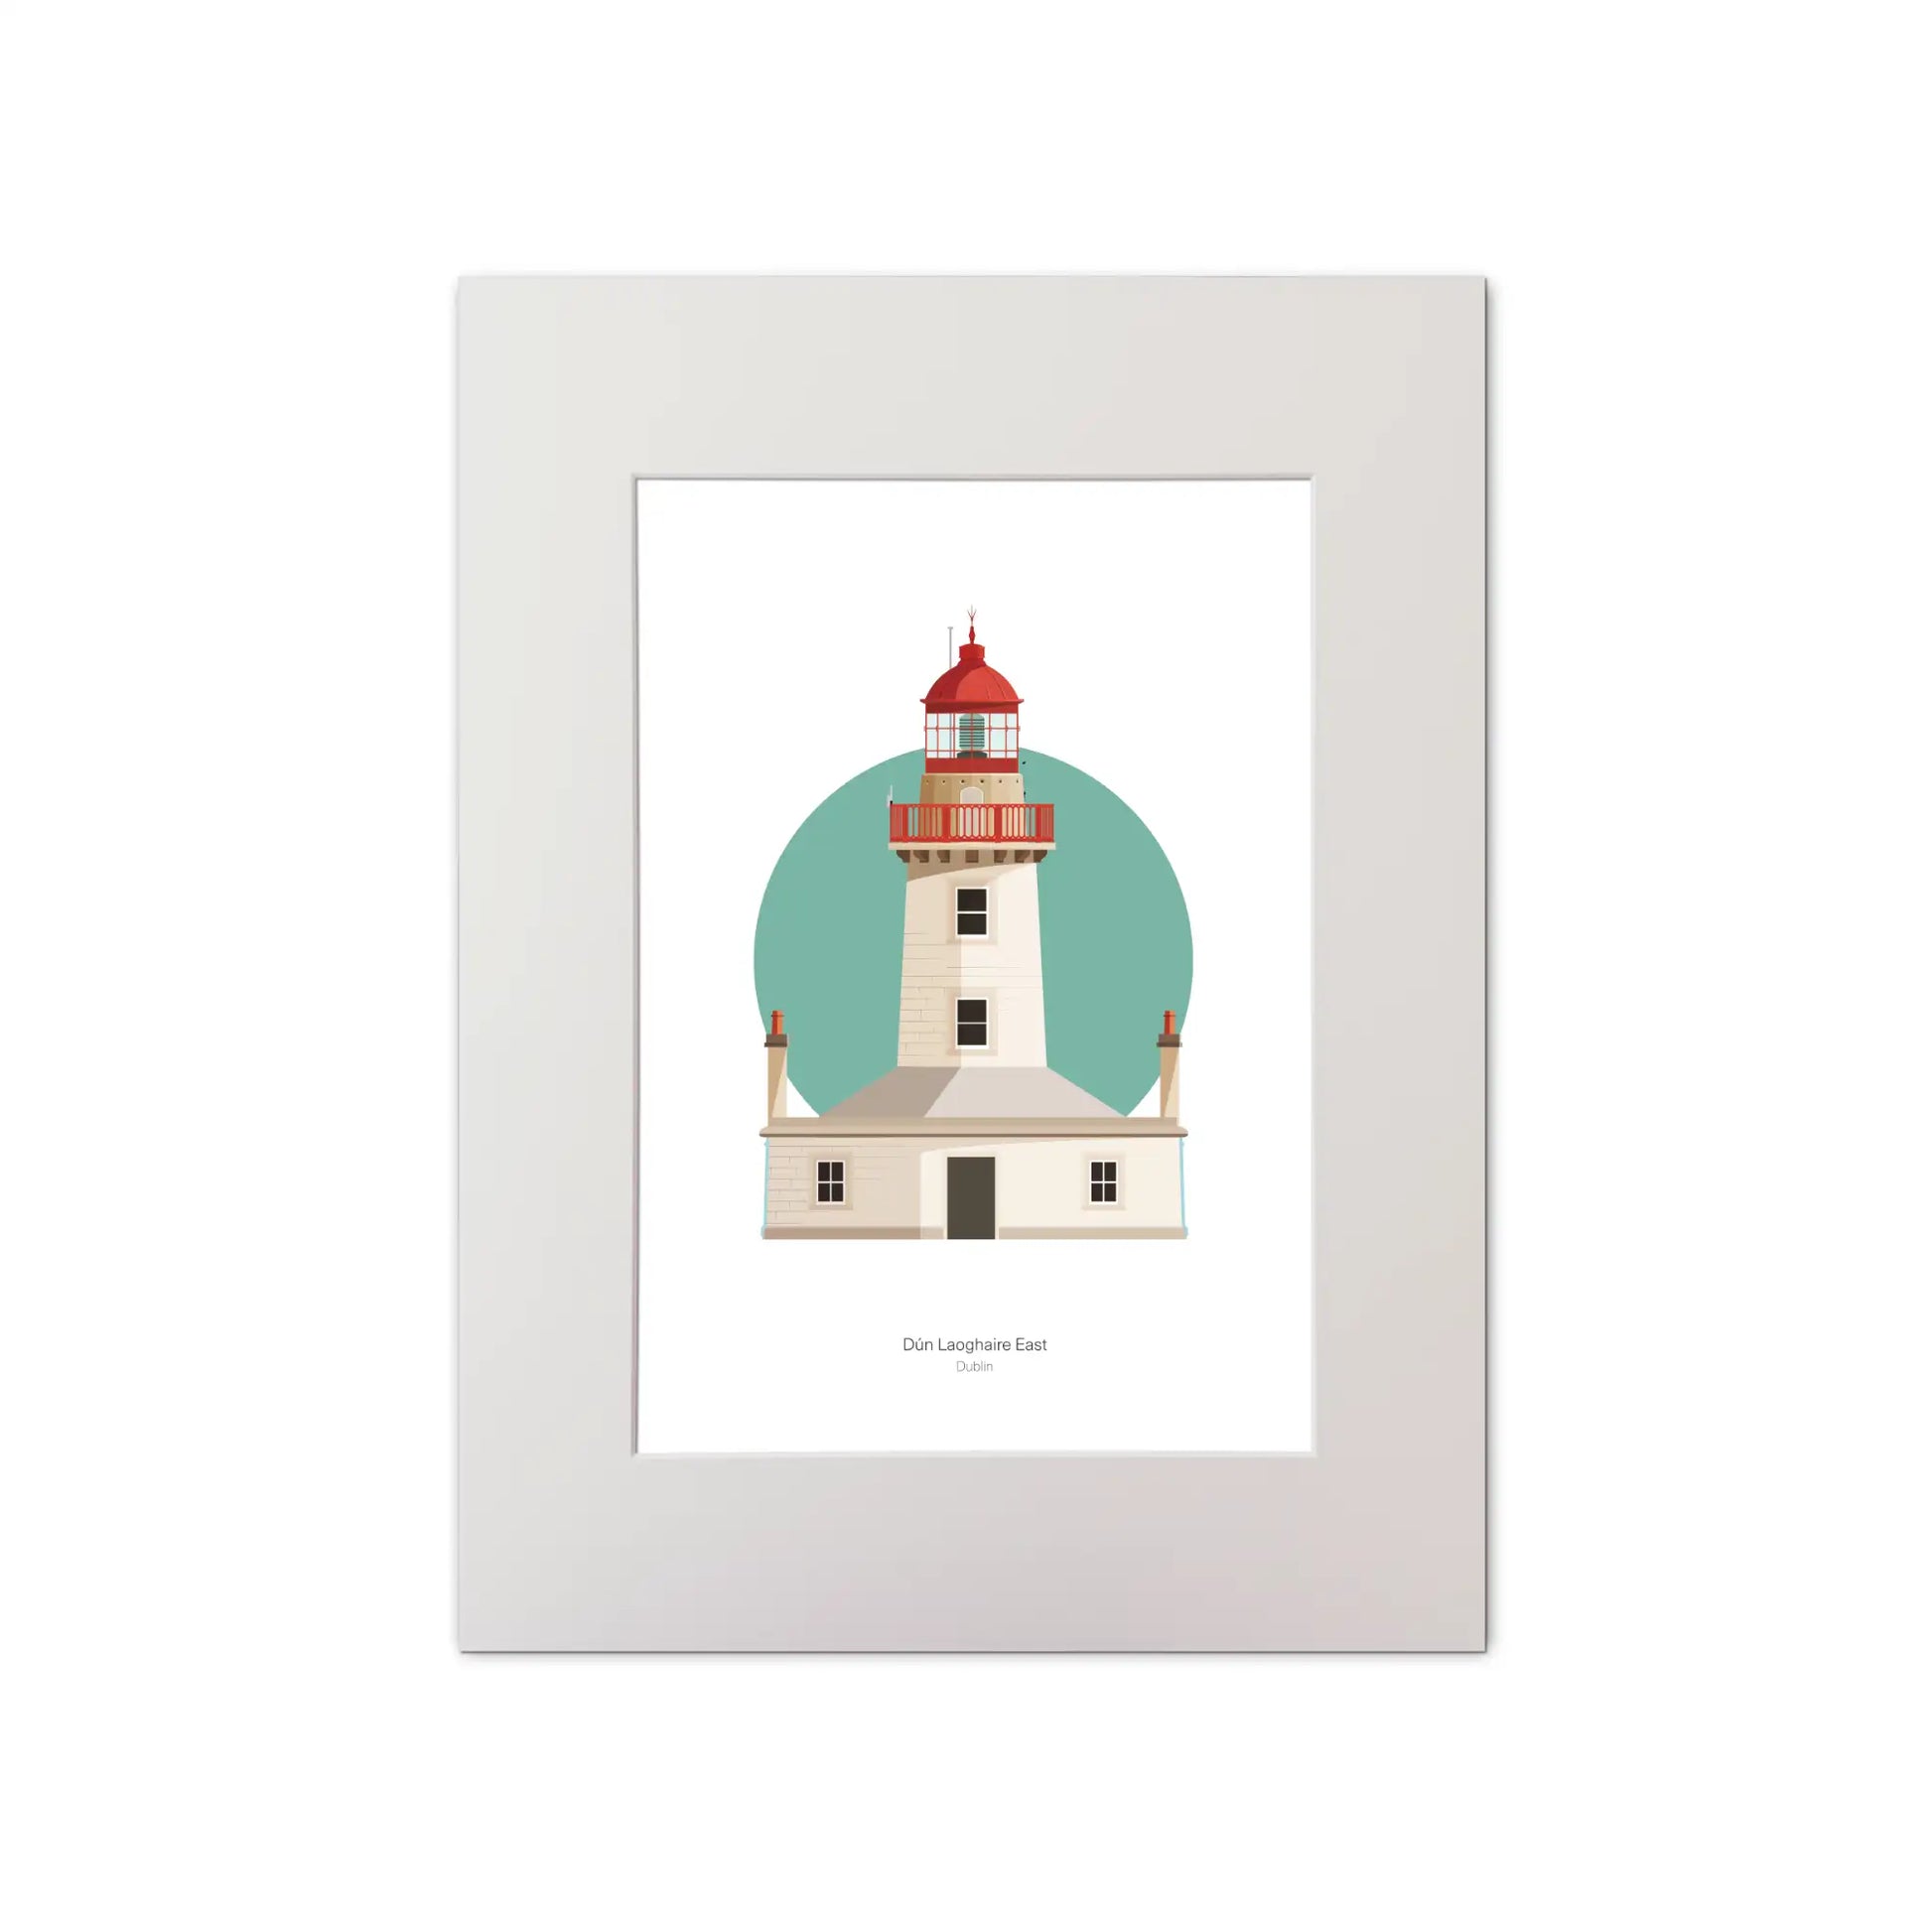 Illustration of Dún Laoghaire East lighthouse on a white background inside light blue square, mounted and measuring 30x40cm.